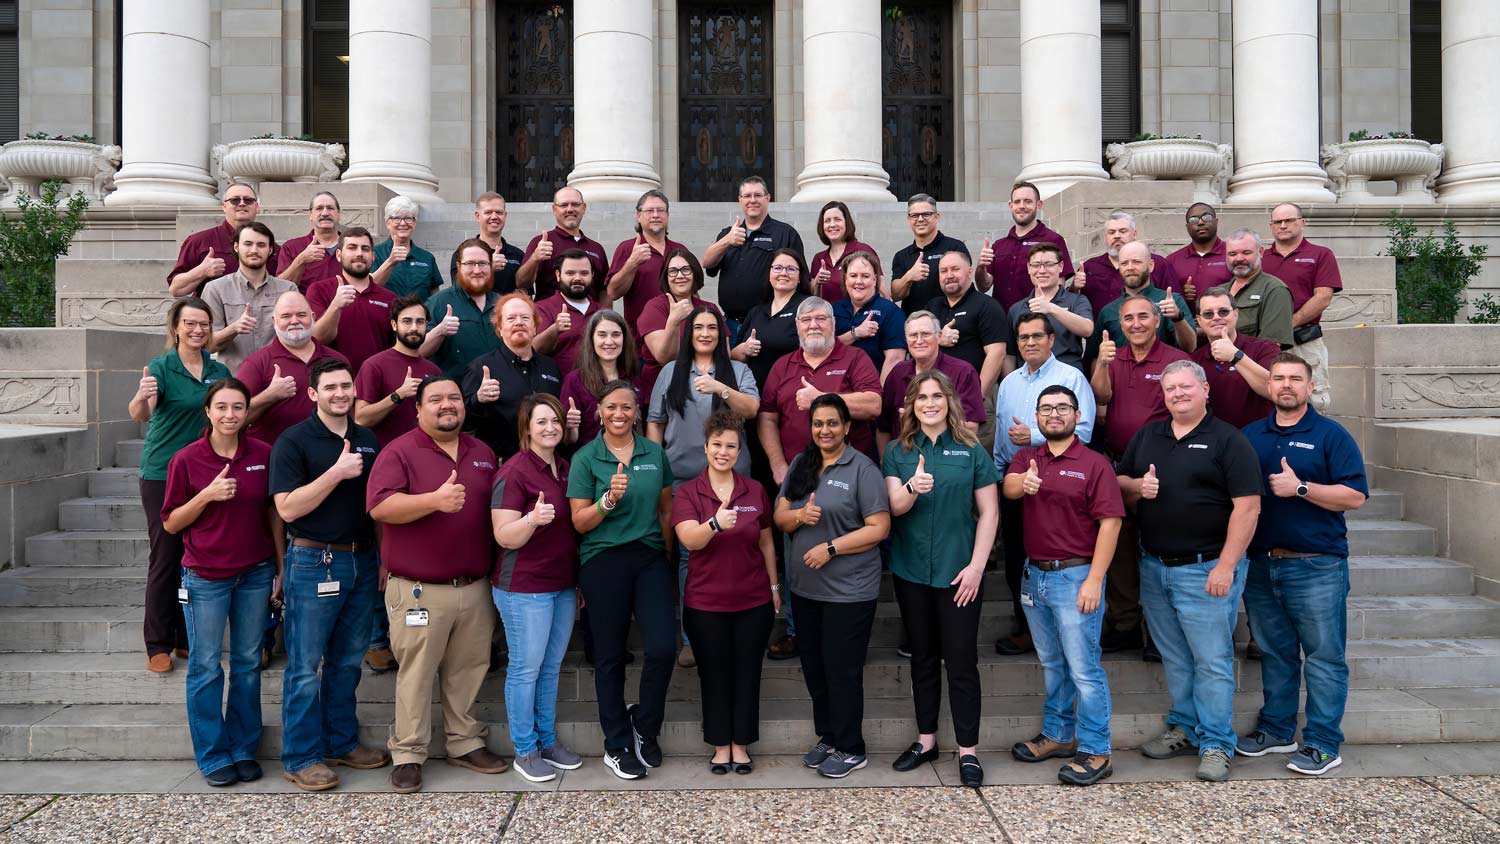 A large group of Texas A&M University staff give Gig 'Ems to the camera